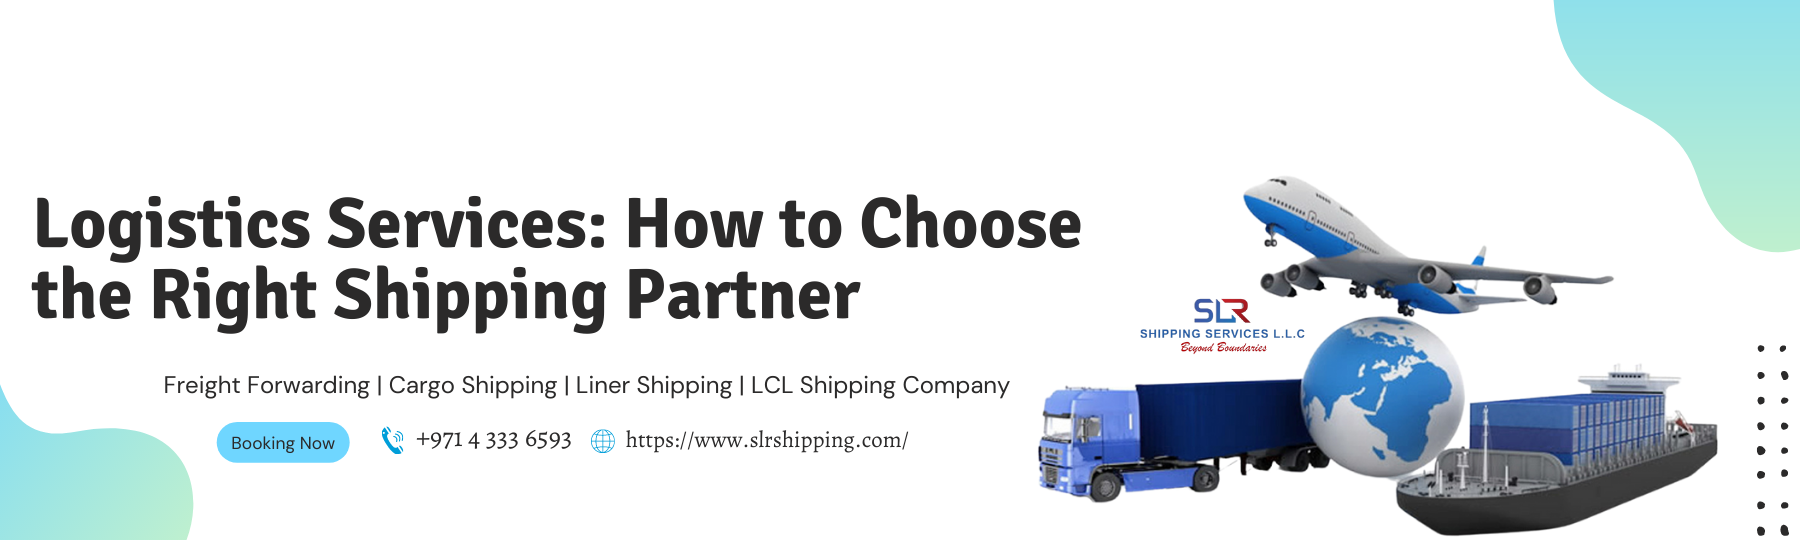 Top 4 Things to Keep in Mind While Choosing Logistics Services